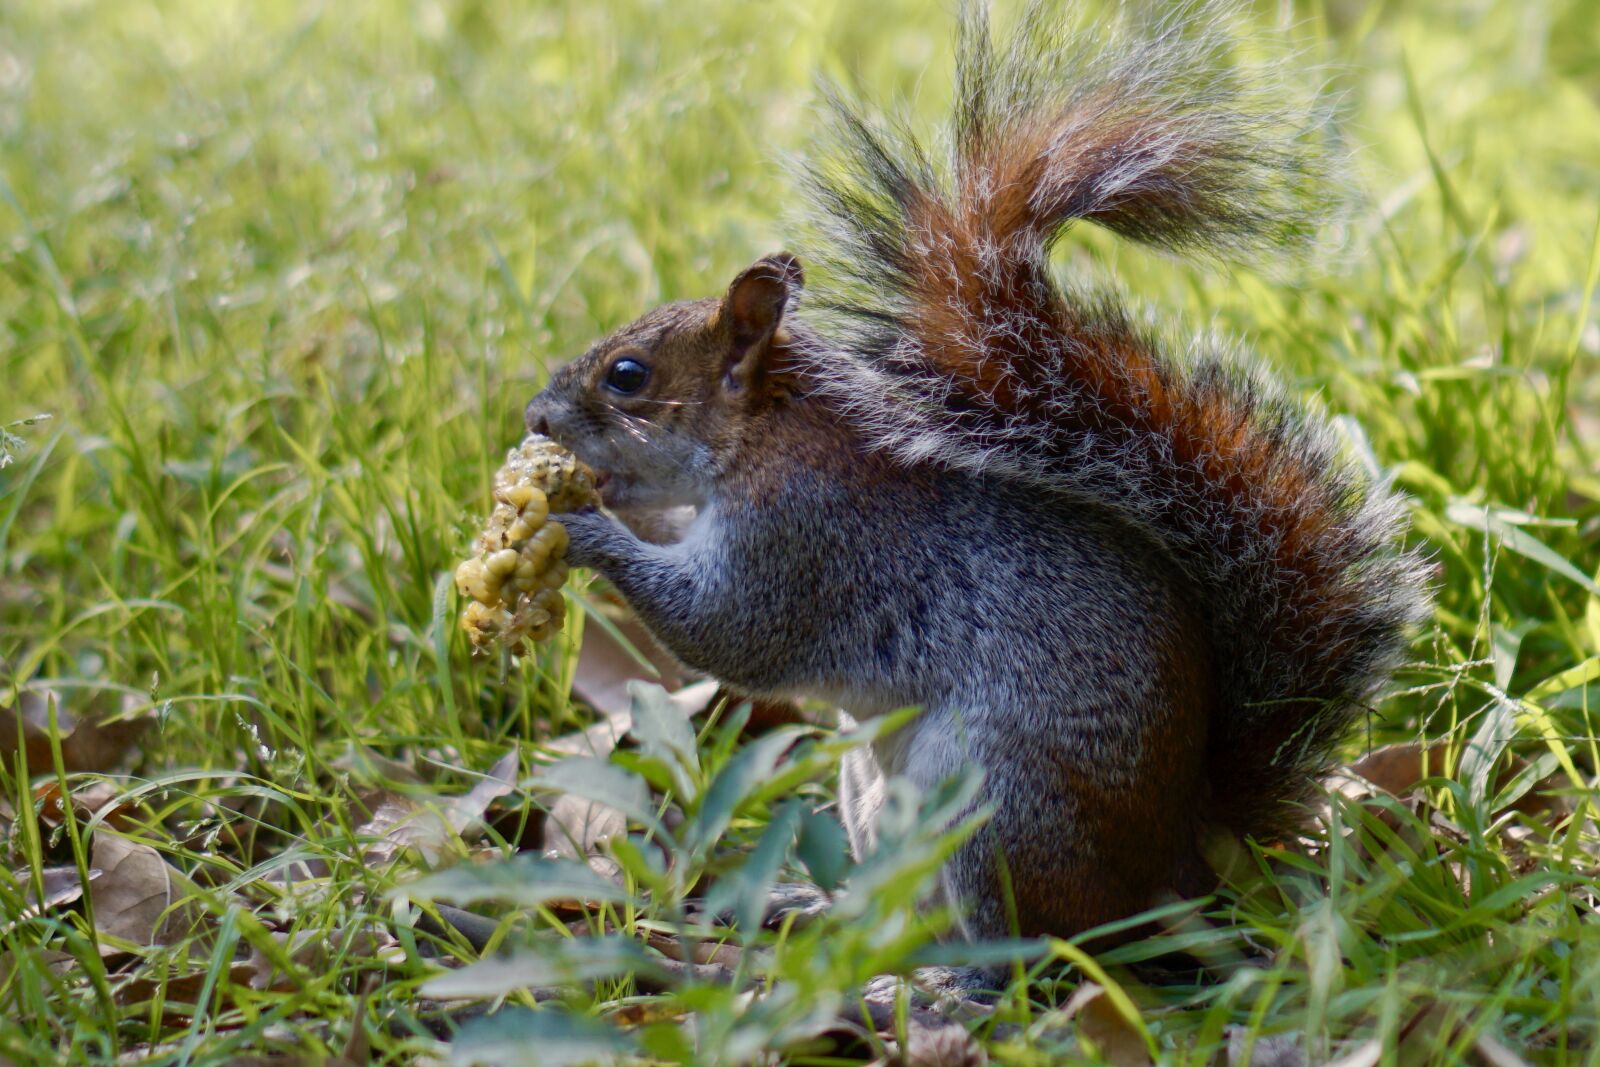 Sony a5100 sample photo. Squirrel, eat, rodent photography